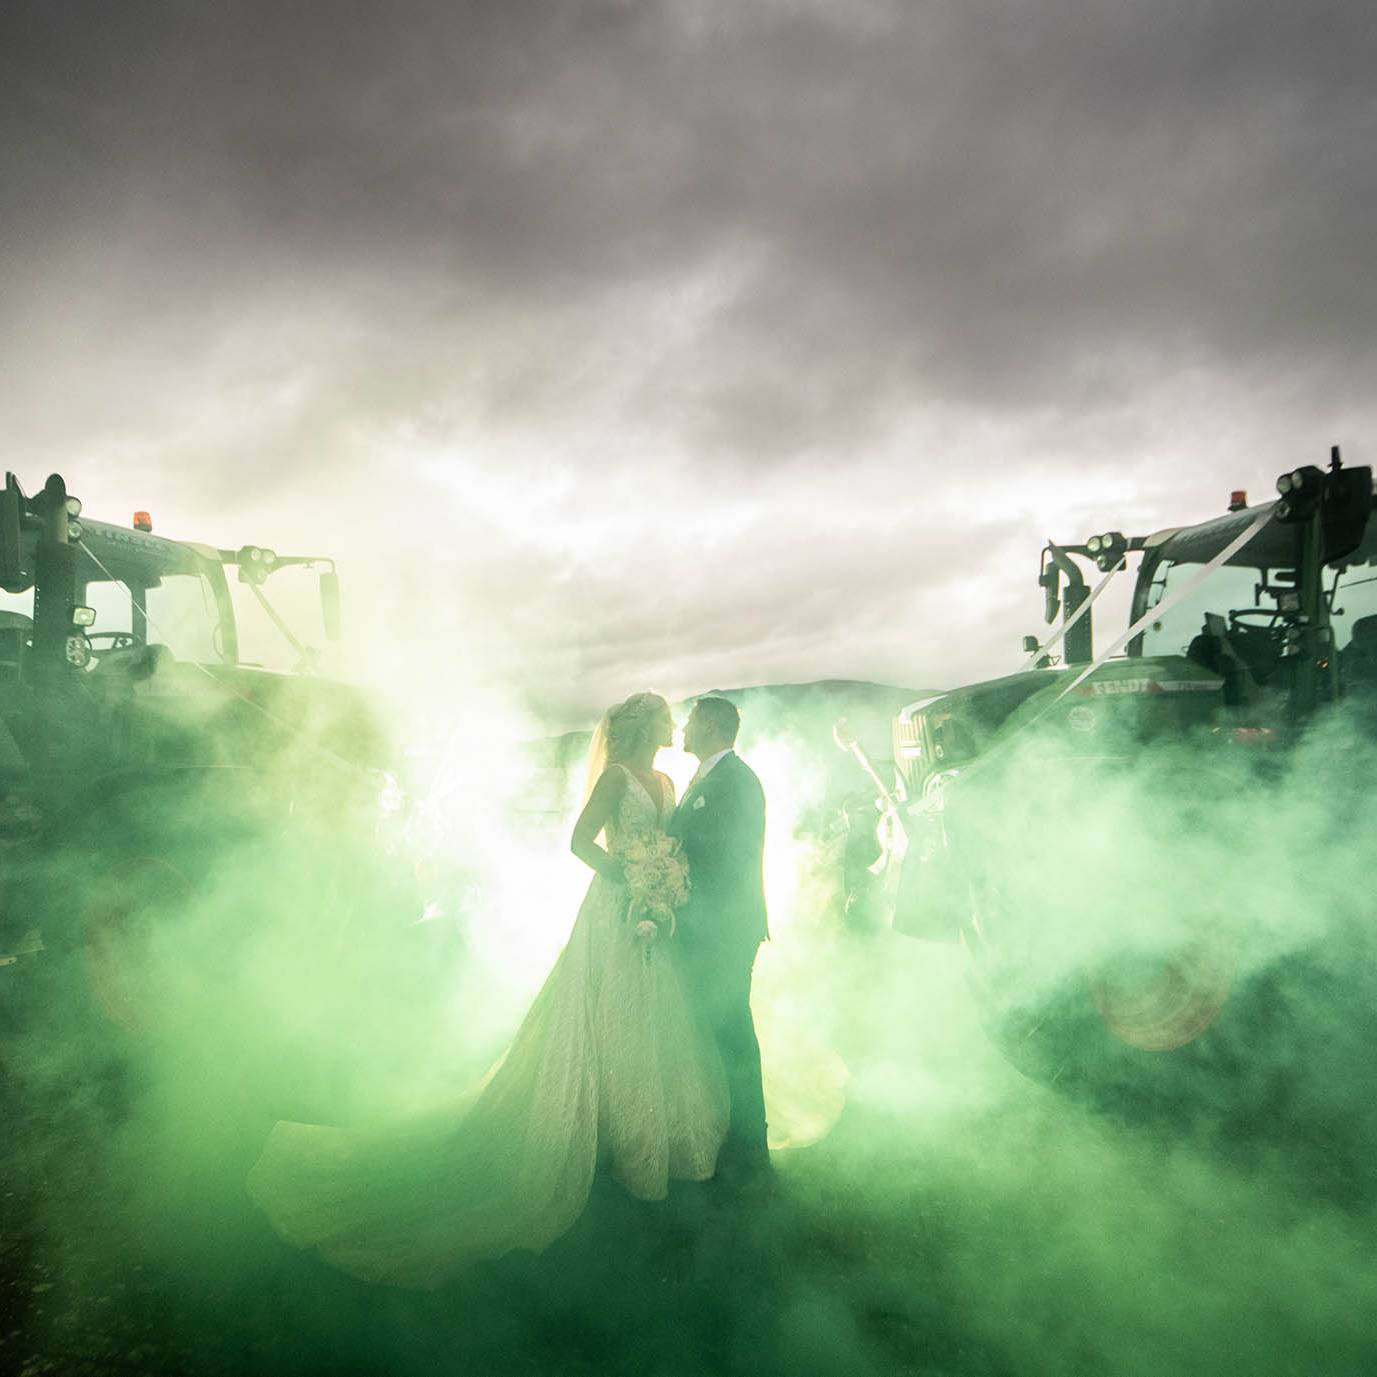 Tips for choosing your wedding photographer - Bride & Groom kissing in between 2 Fendt Tractors - Green smoke bombs create a dramatic backdrop